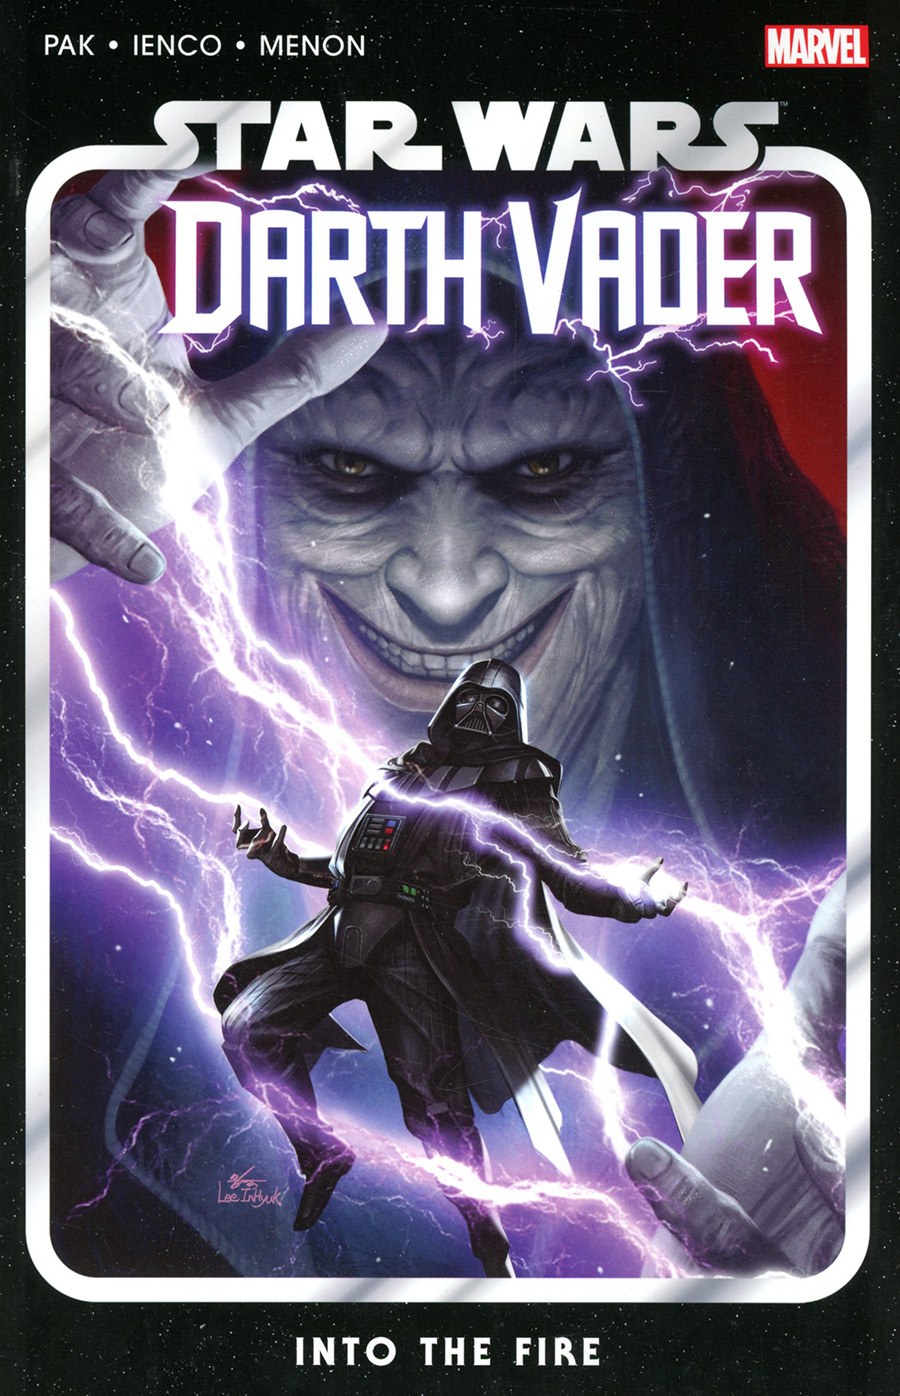 Star Wars Darth Vader By Greg Pak Vol 2 Into The Fire TP